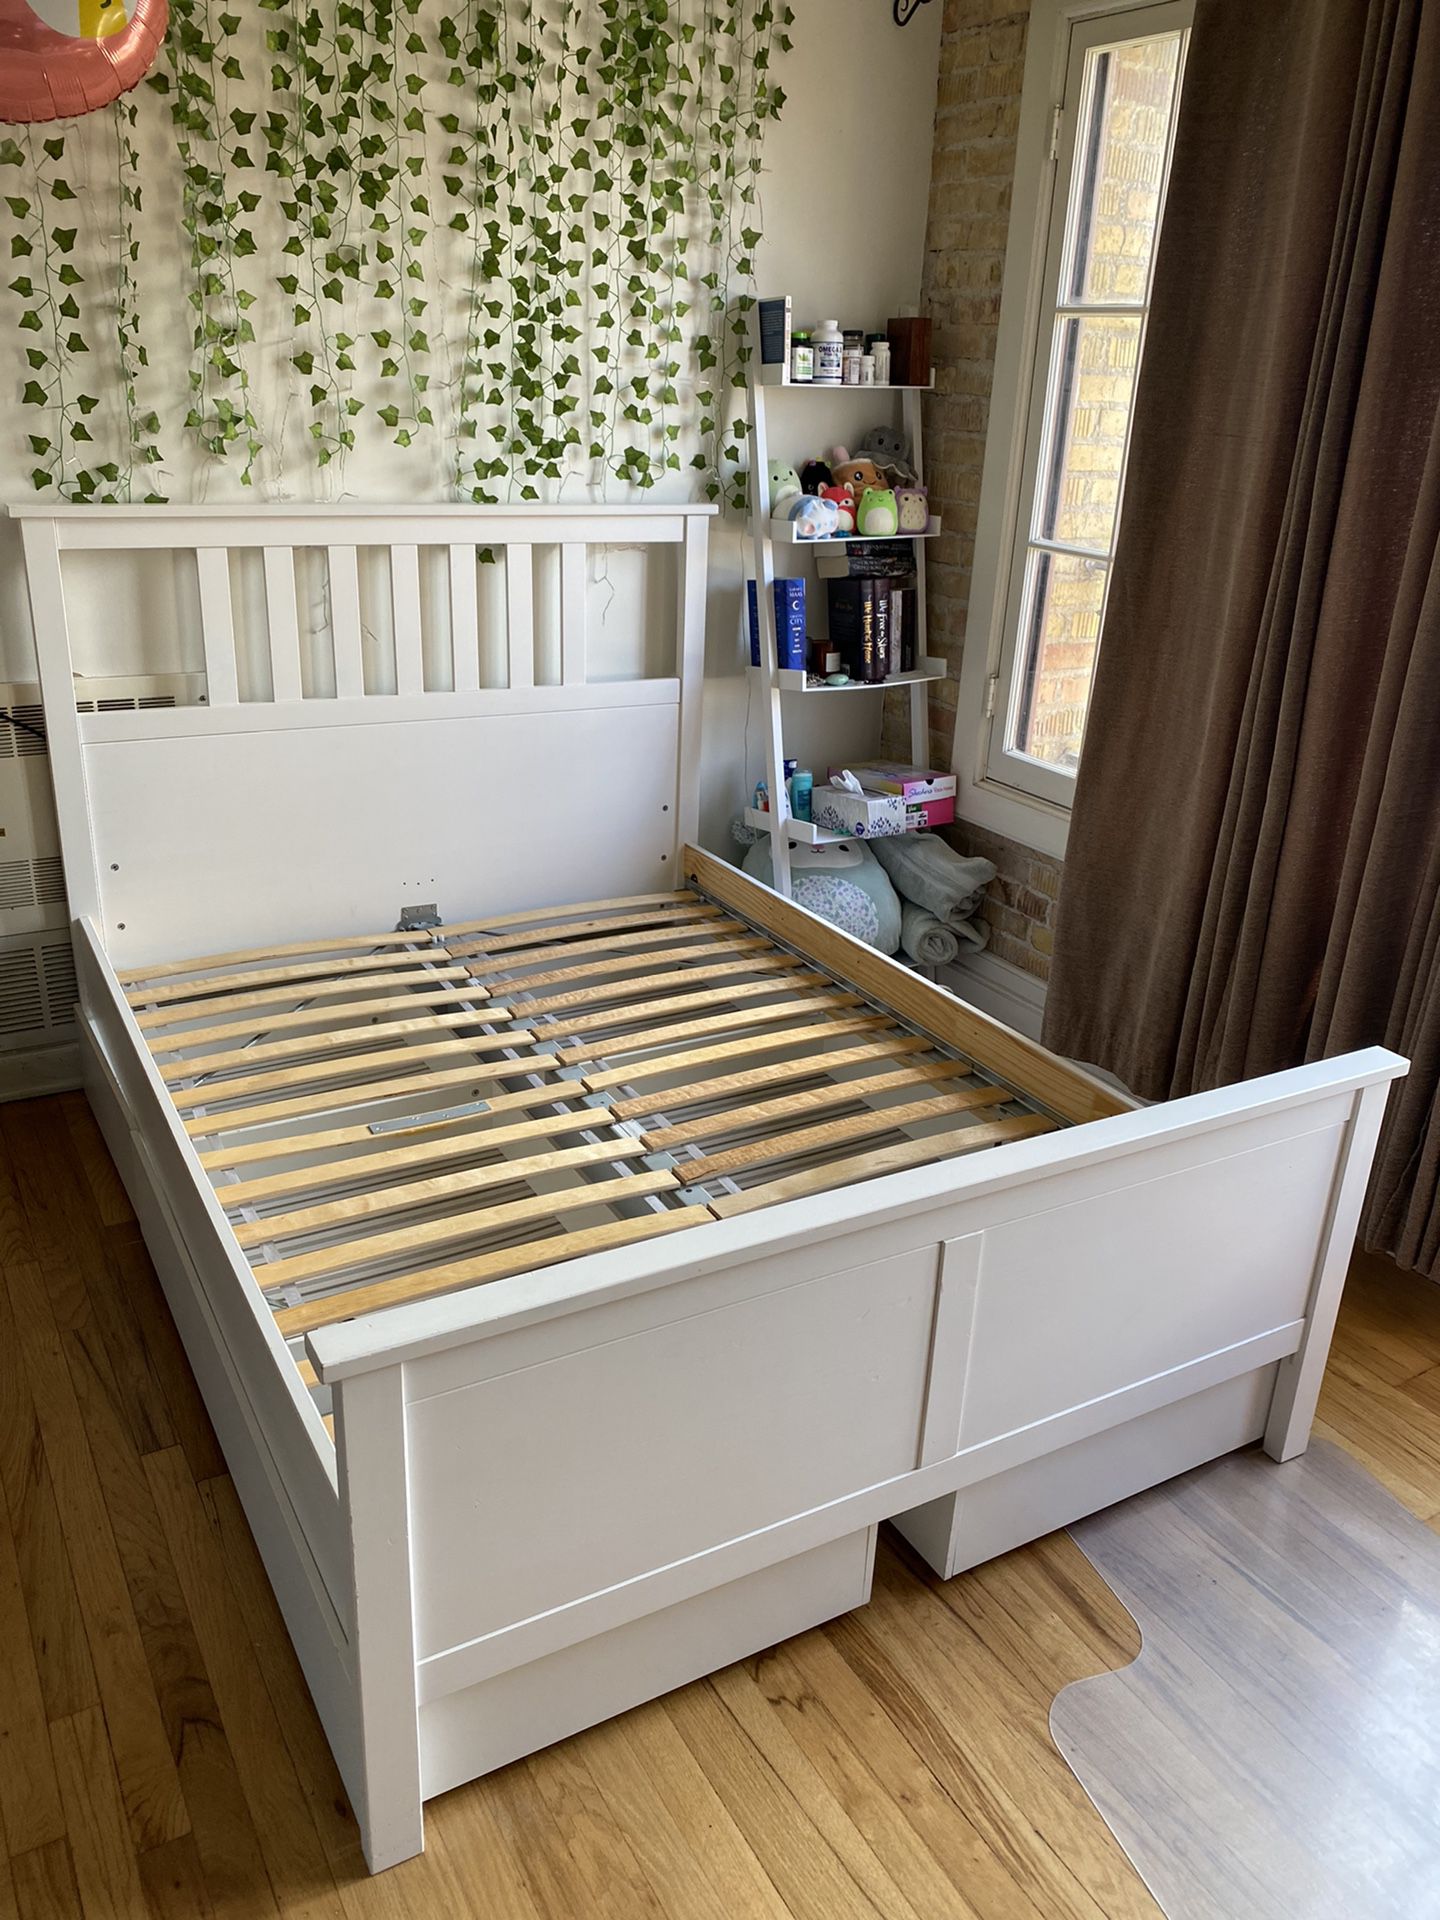 Mantel Arctic Sandy IKEA HEMNES Bed Frame (Full Size) for Sale in Ventura, CA - OfferUp